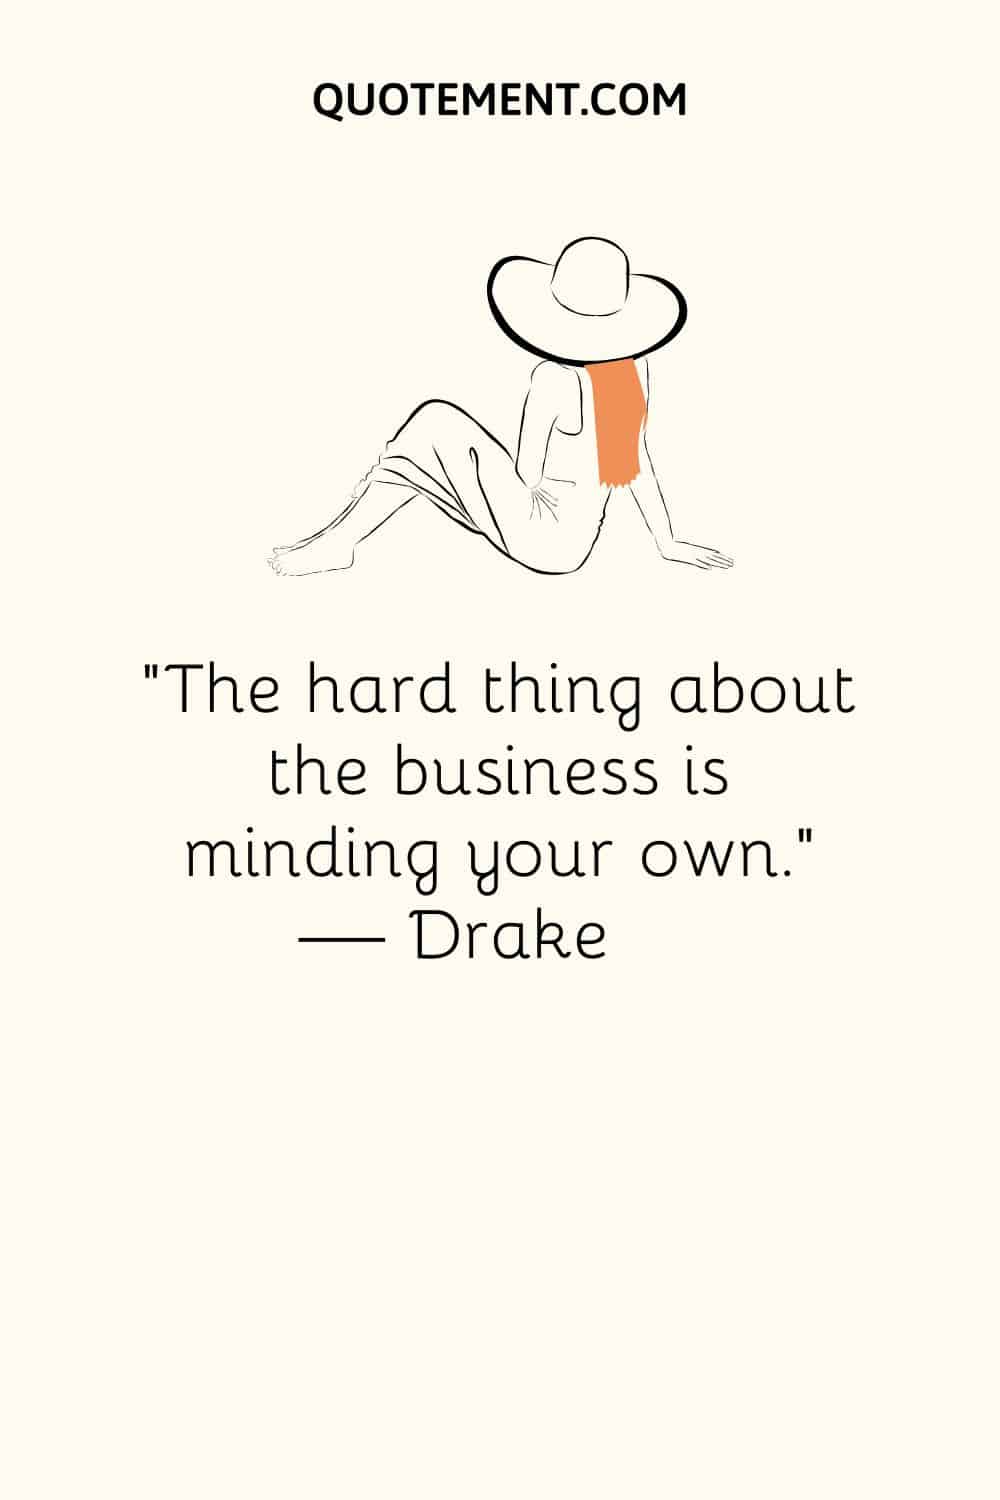 The hard thing about the business is minding your own